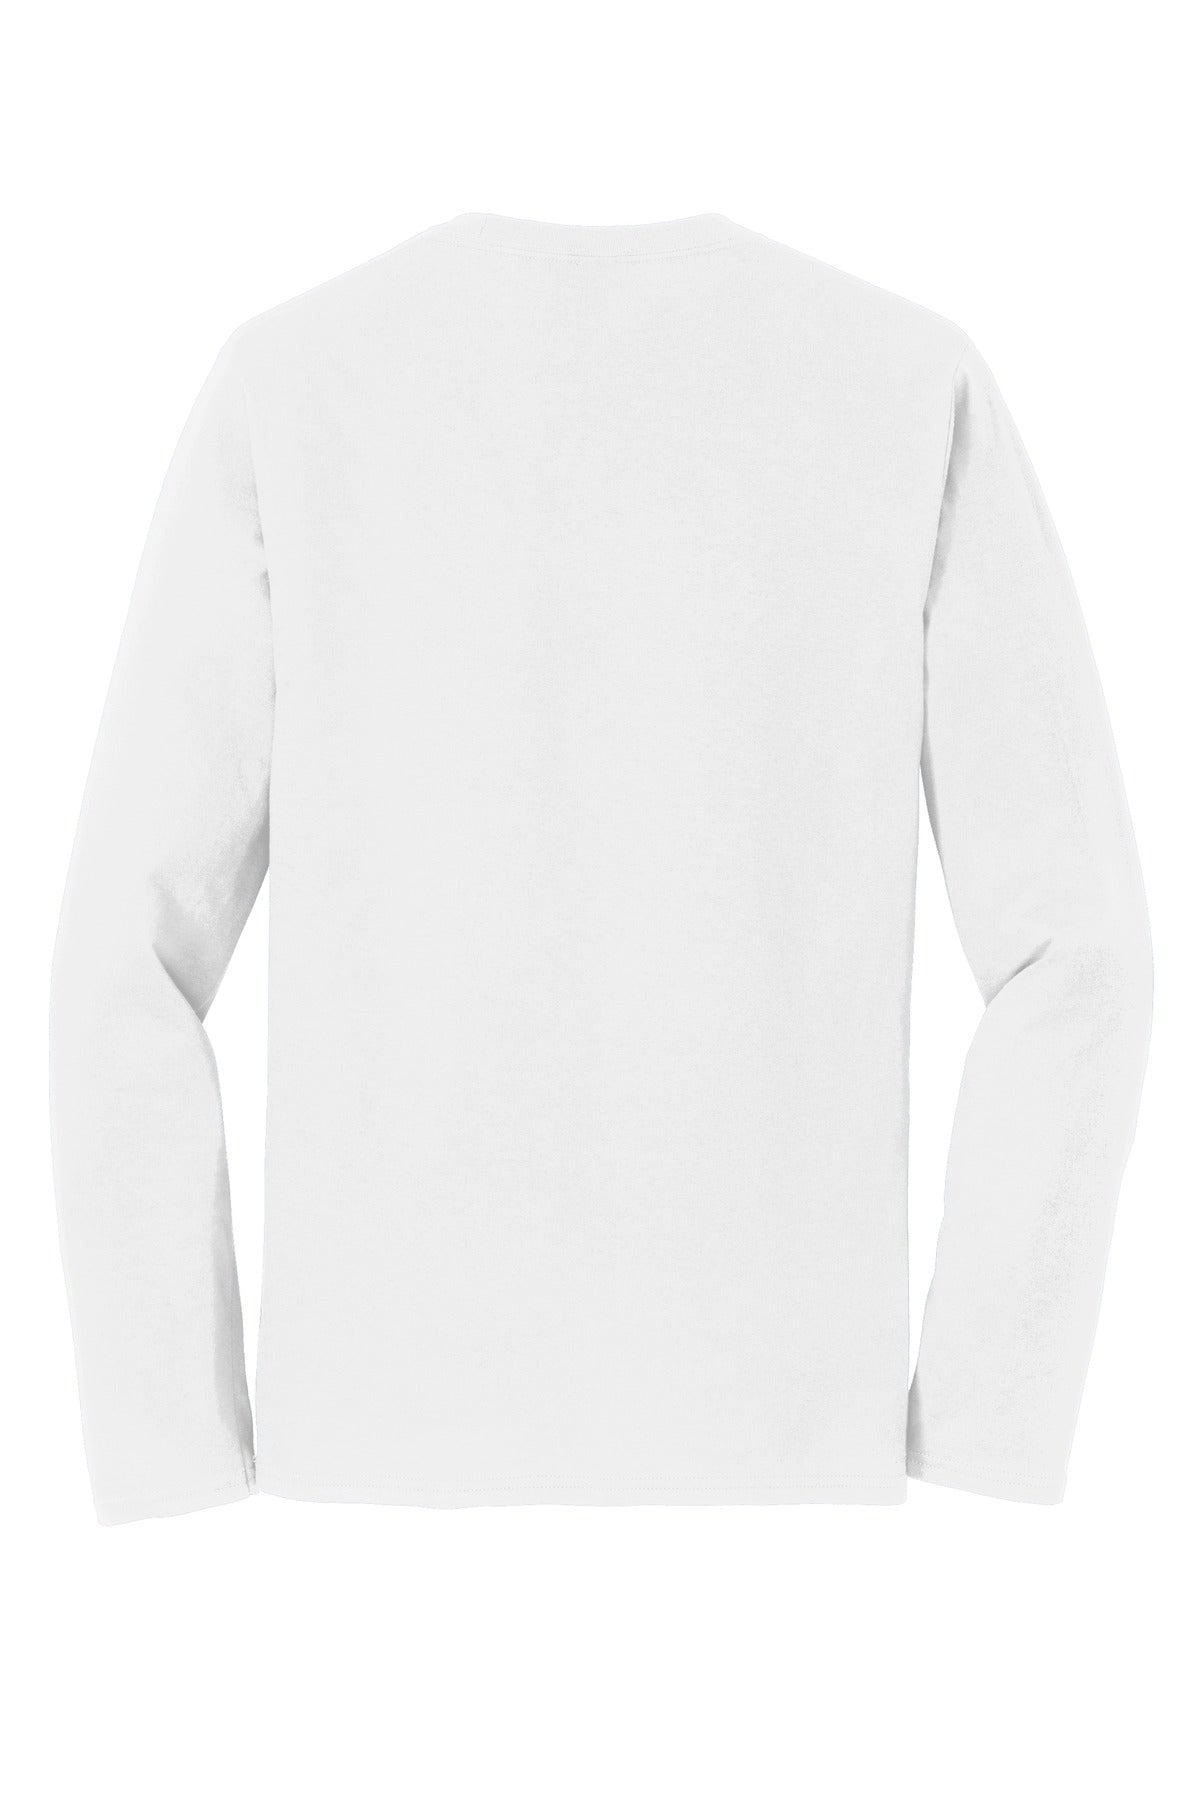 Port & Company® Long Sleeve Fan Favorite Tee. PC450LS – On Game Day